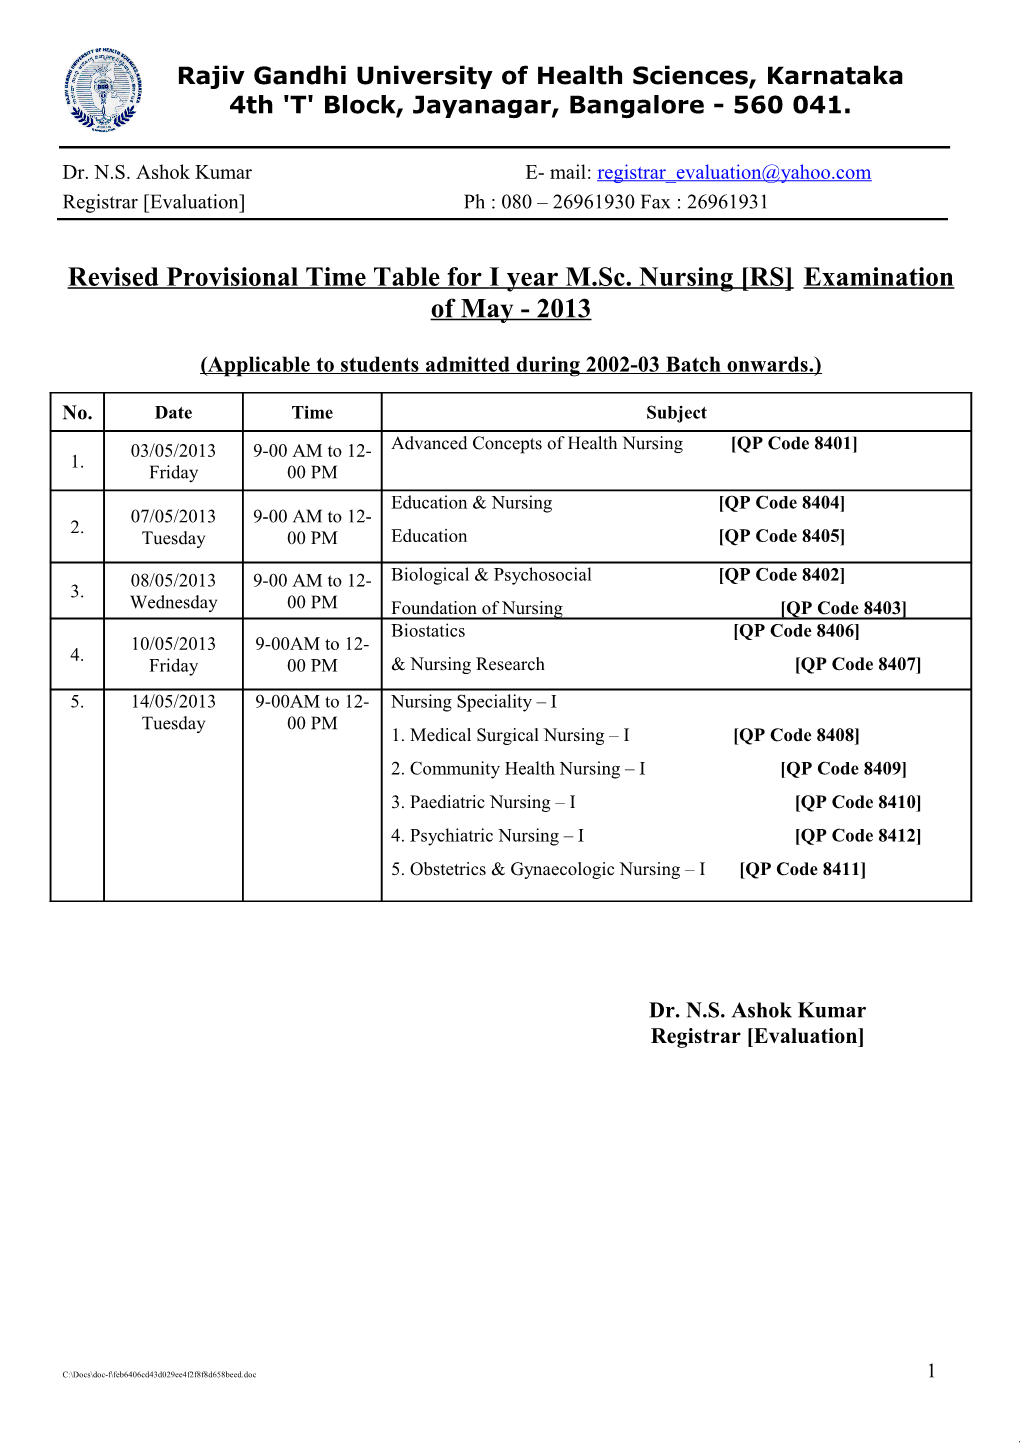 Revised Provisional Time Table for I Year M.Sc. Nursing RS Examination of May - 2013